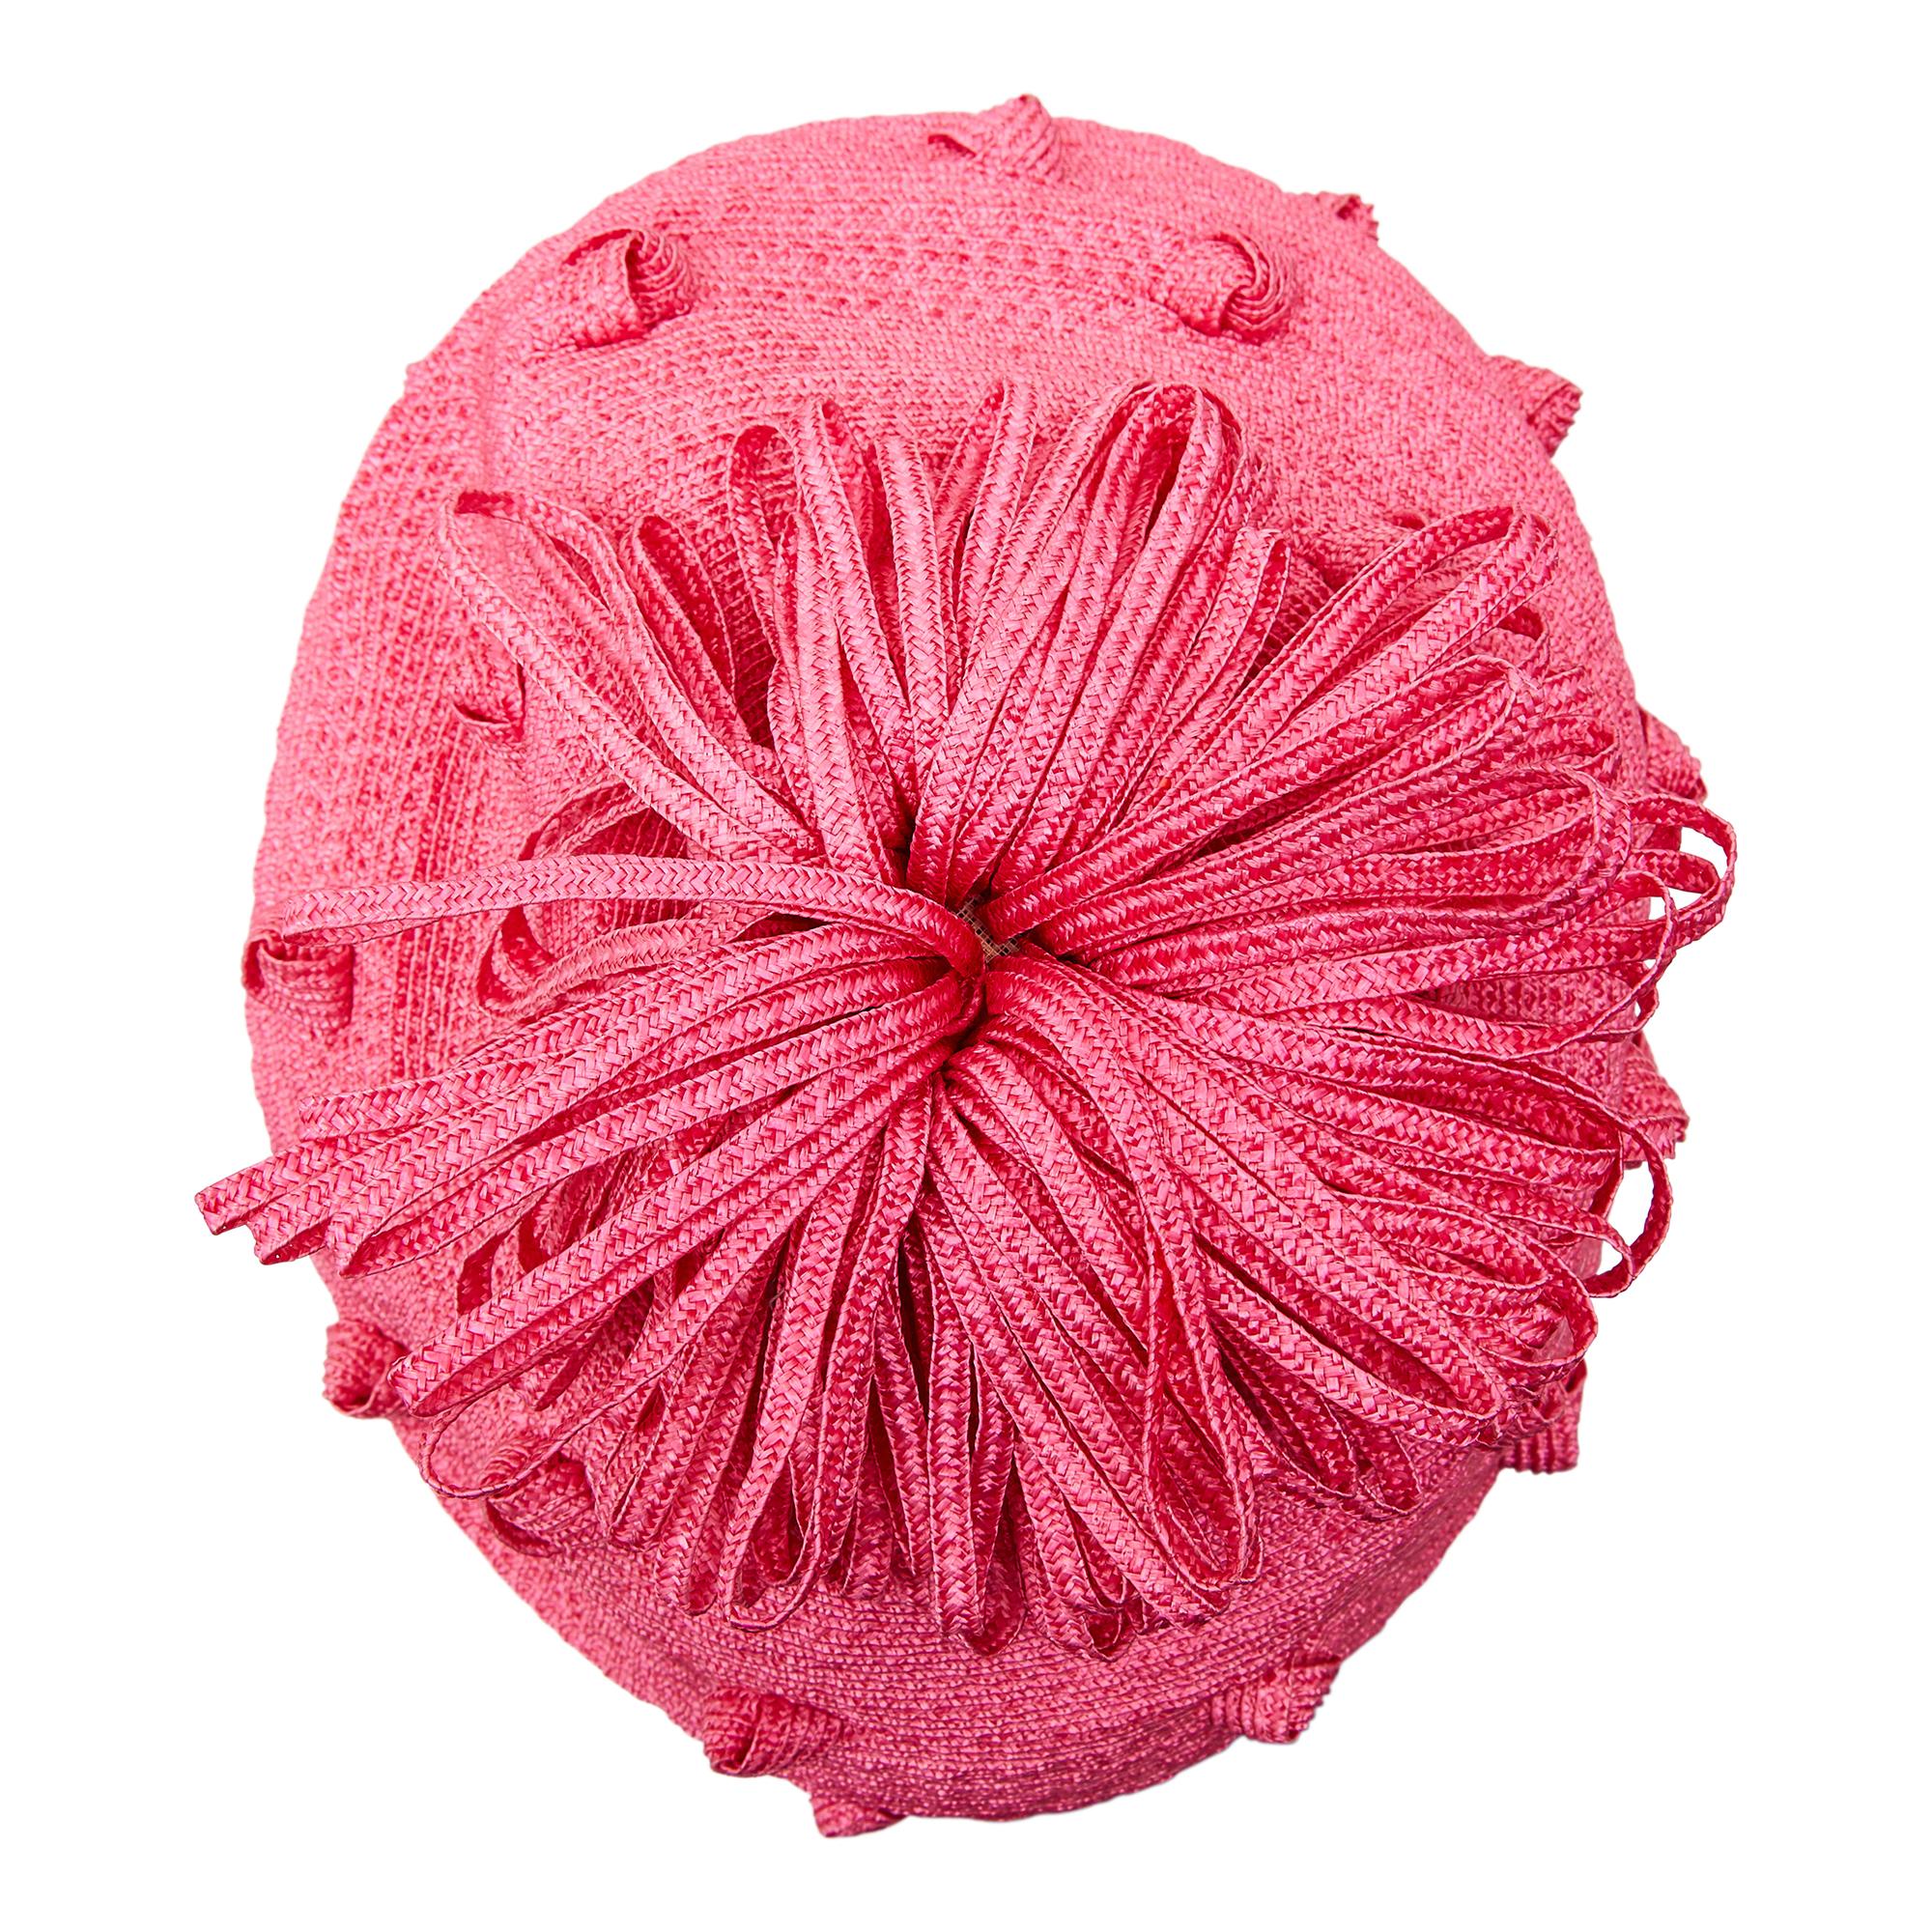 This is a really fun Simone Mirman straw bobble hat dating from the 1960s. The straw is in a bubble-gum pink, offset with quirky knotting throughout as well as a ruffle trim pom pom affixed to the top of the crown. This hat could be worn to the side